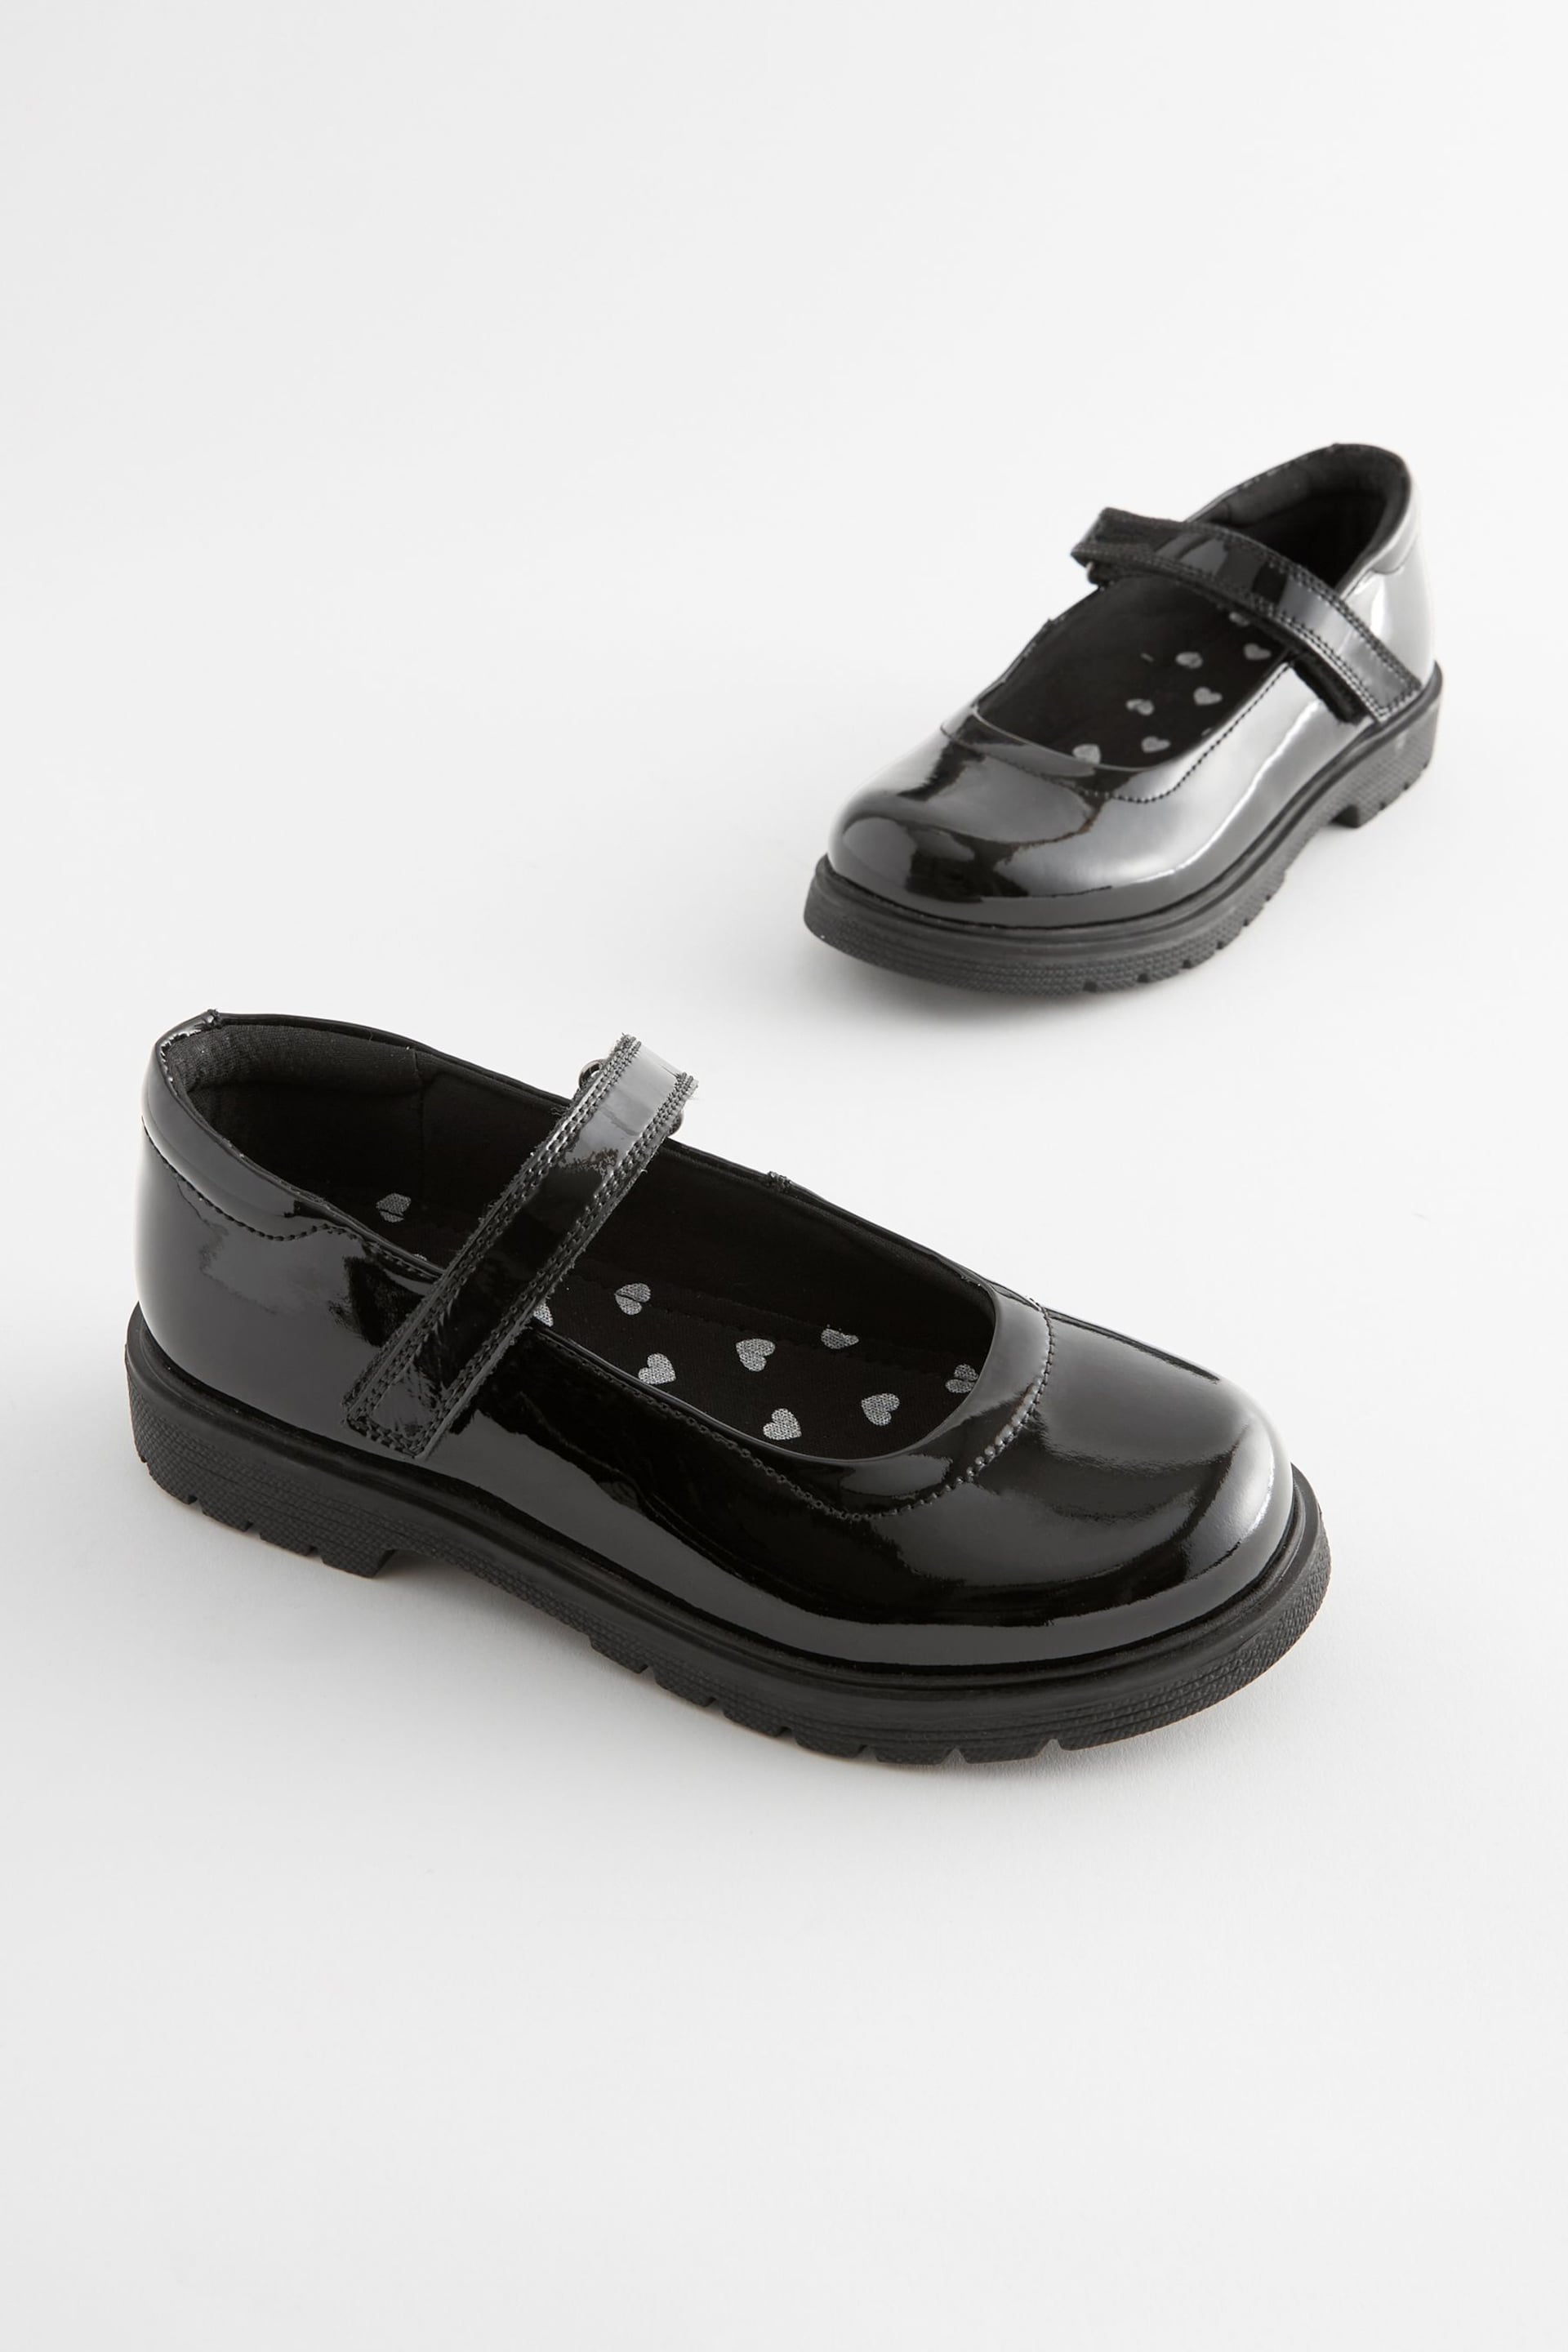 Black Patent Standard Fit (F) School Leather Chunky Mary Jane Shoes - Image 4 of 5